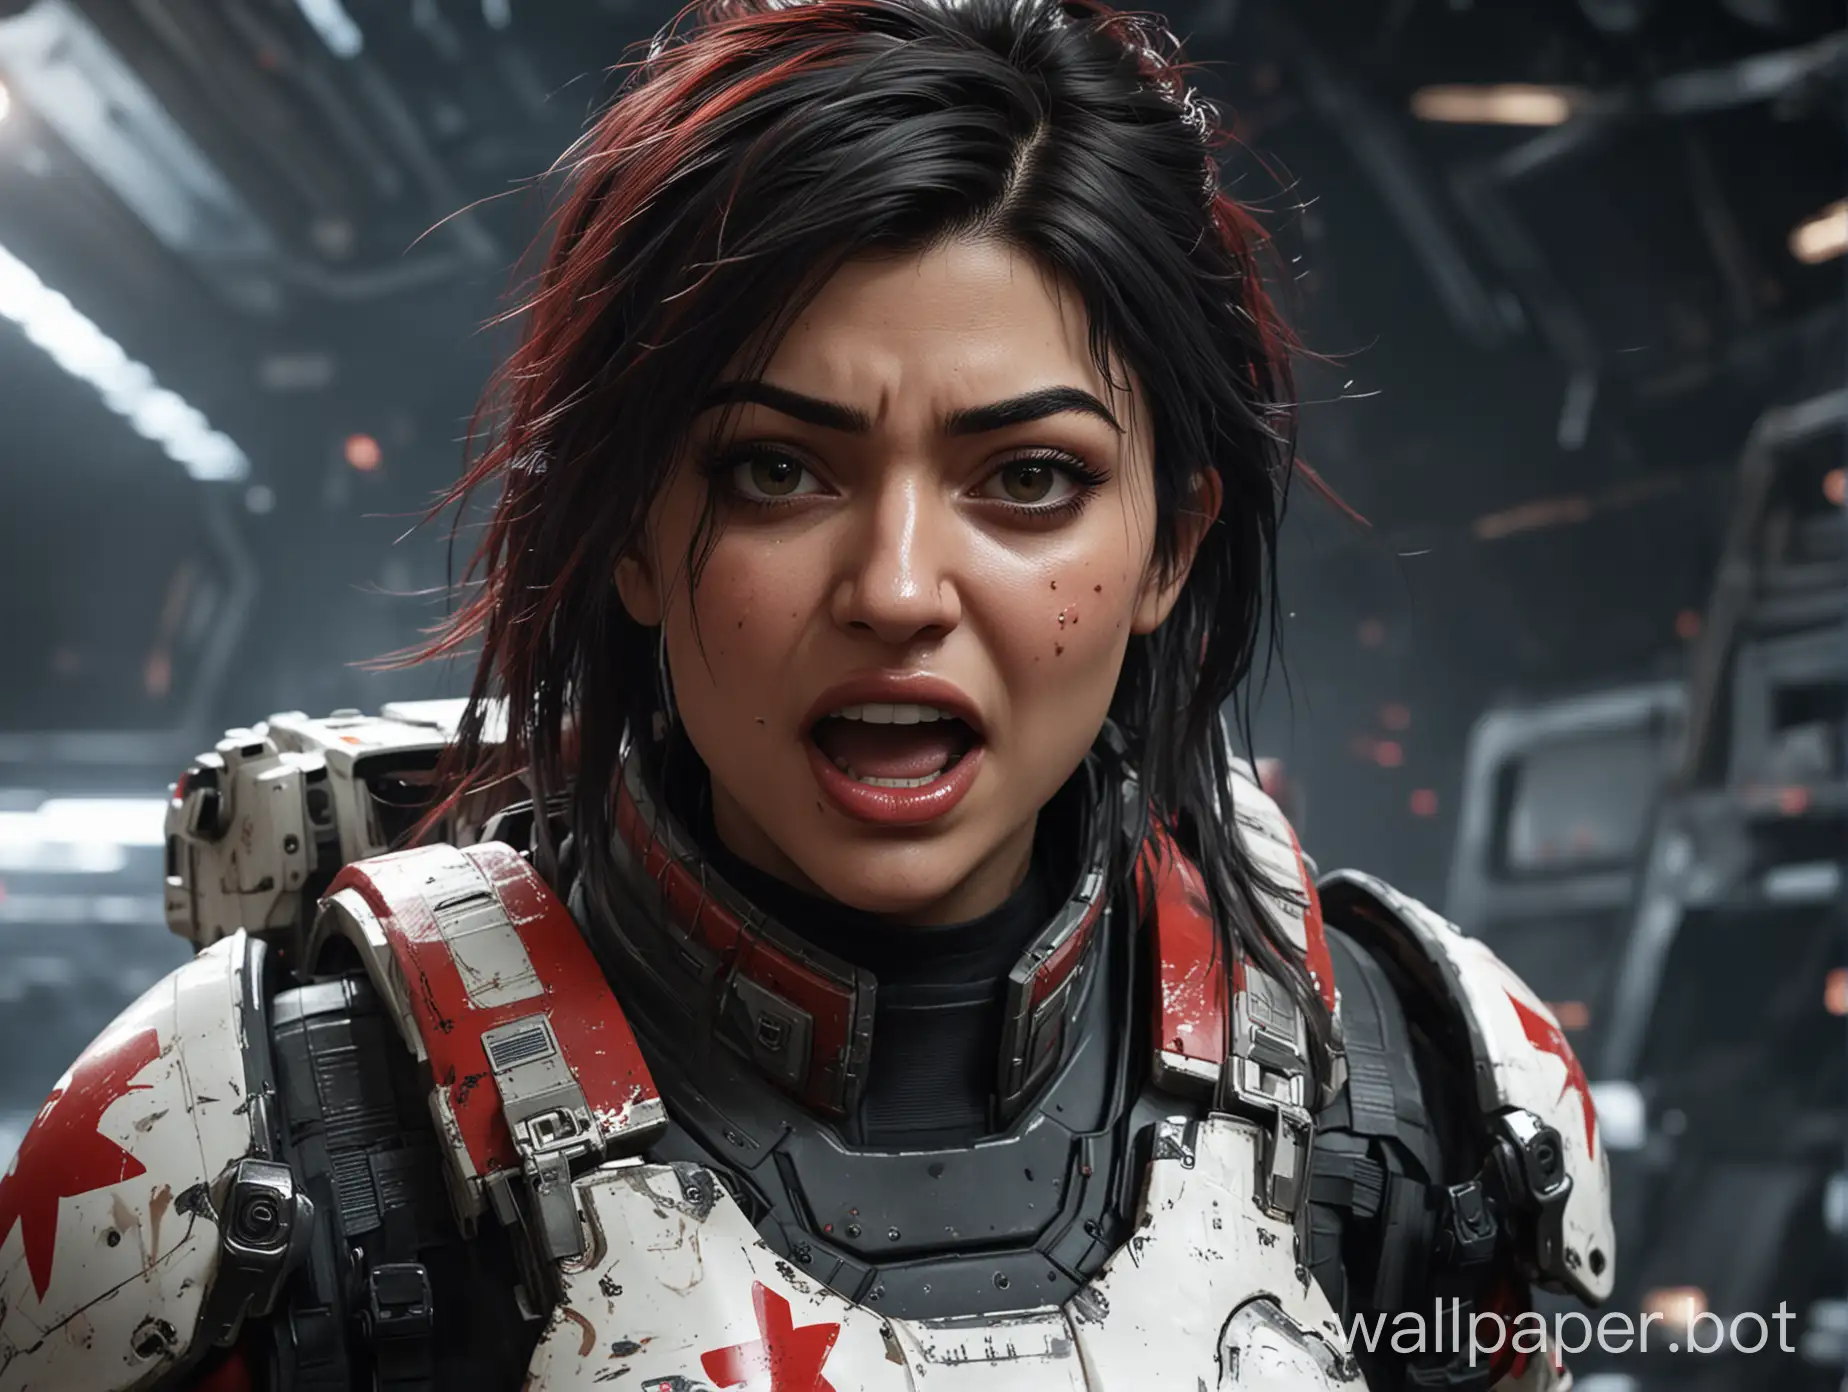 Star Citizen, yelling woman with Kylie Jenner face, action scene, battle, perspire, feeling pain, tears, open mouth anger yell, extreme close-up headshot, space background, emergency, hearty expression, curvy female body shape, black open messy hair, Medic, red cross, first aid, shiny cyber armor with the 2 colors white and red, curvy female body shape, sci-fi,